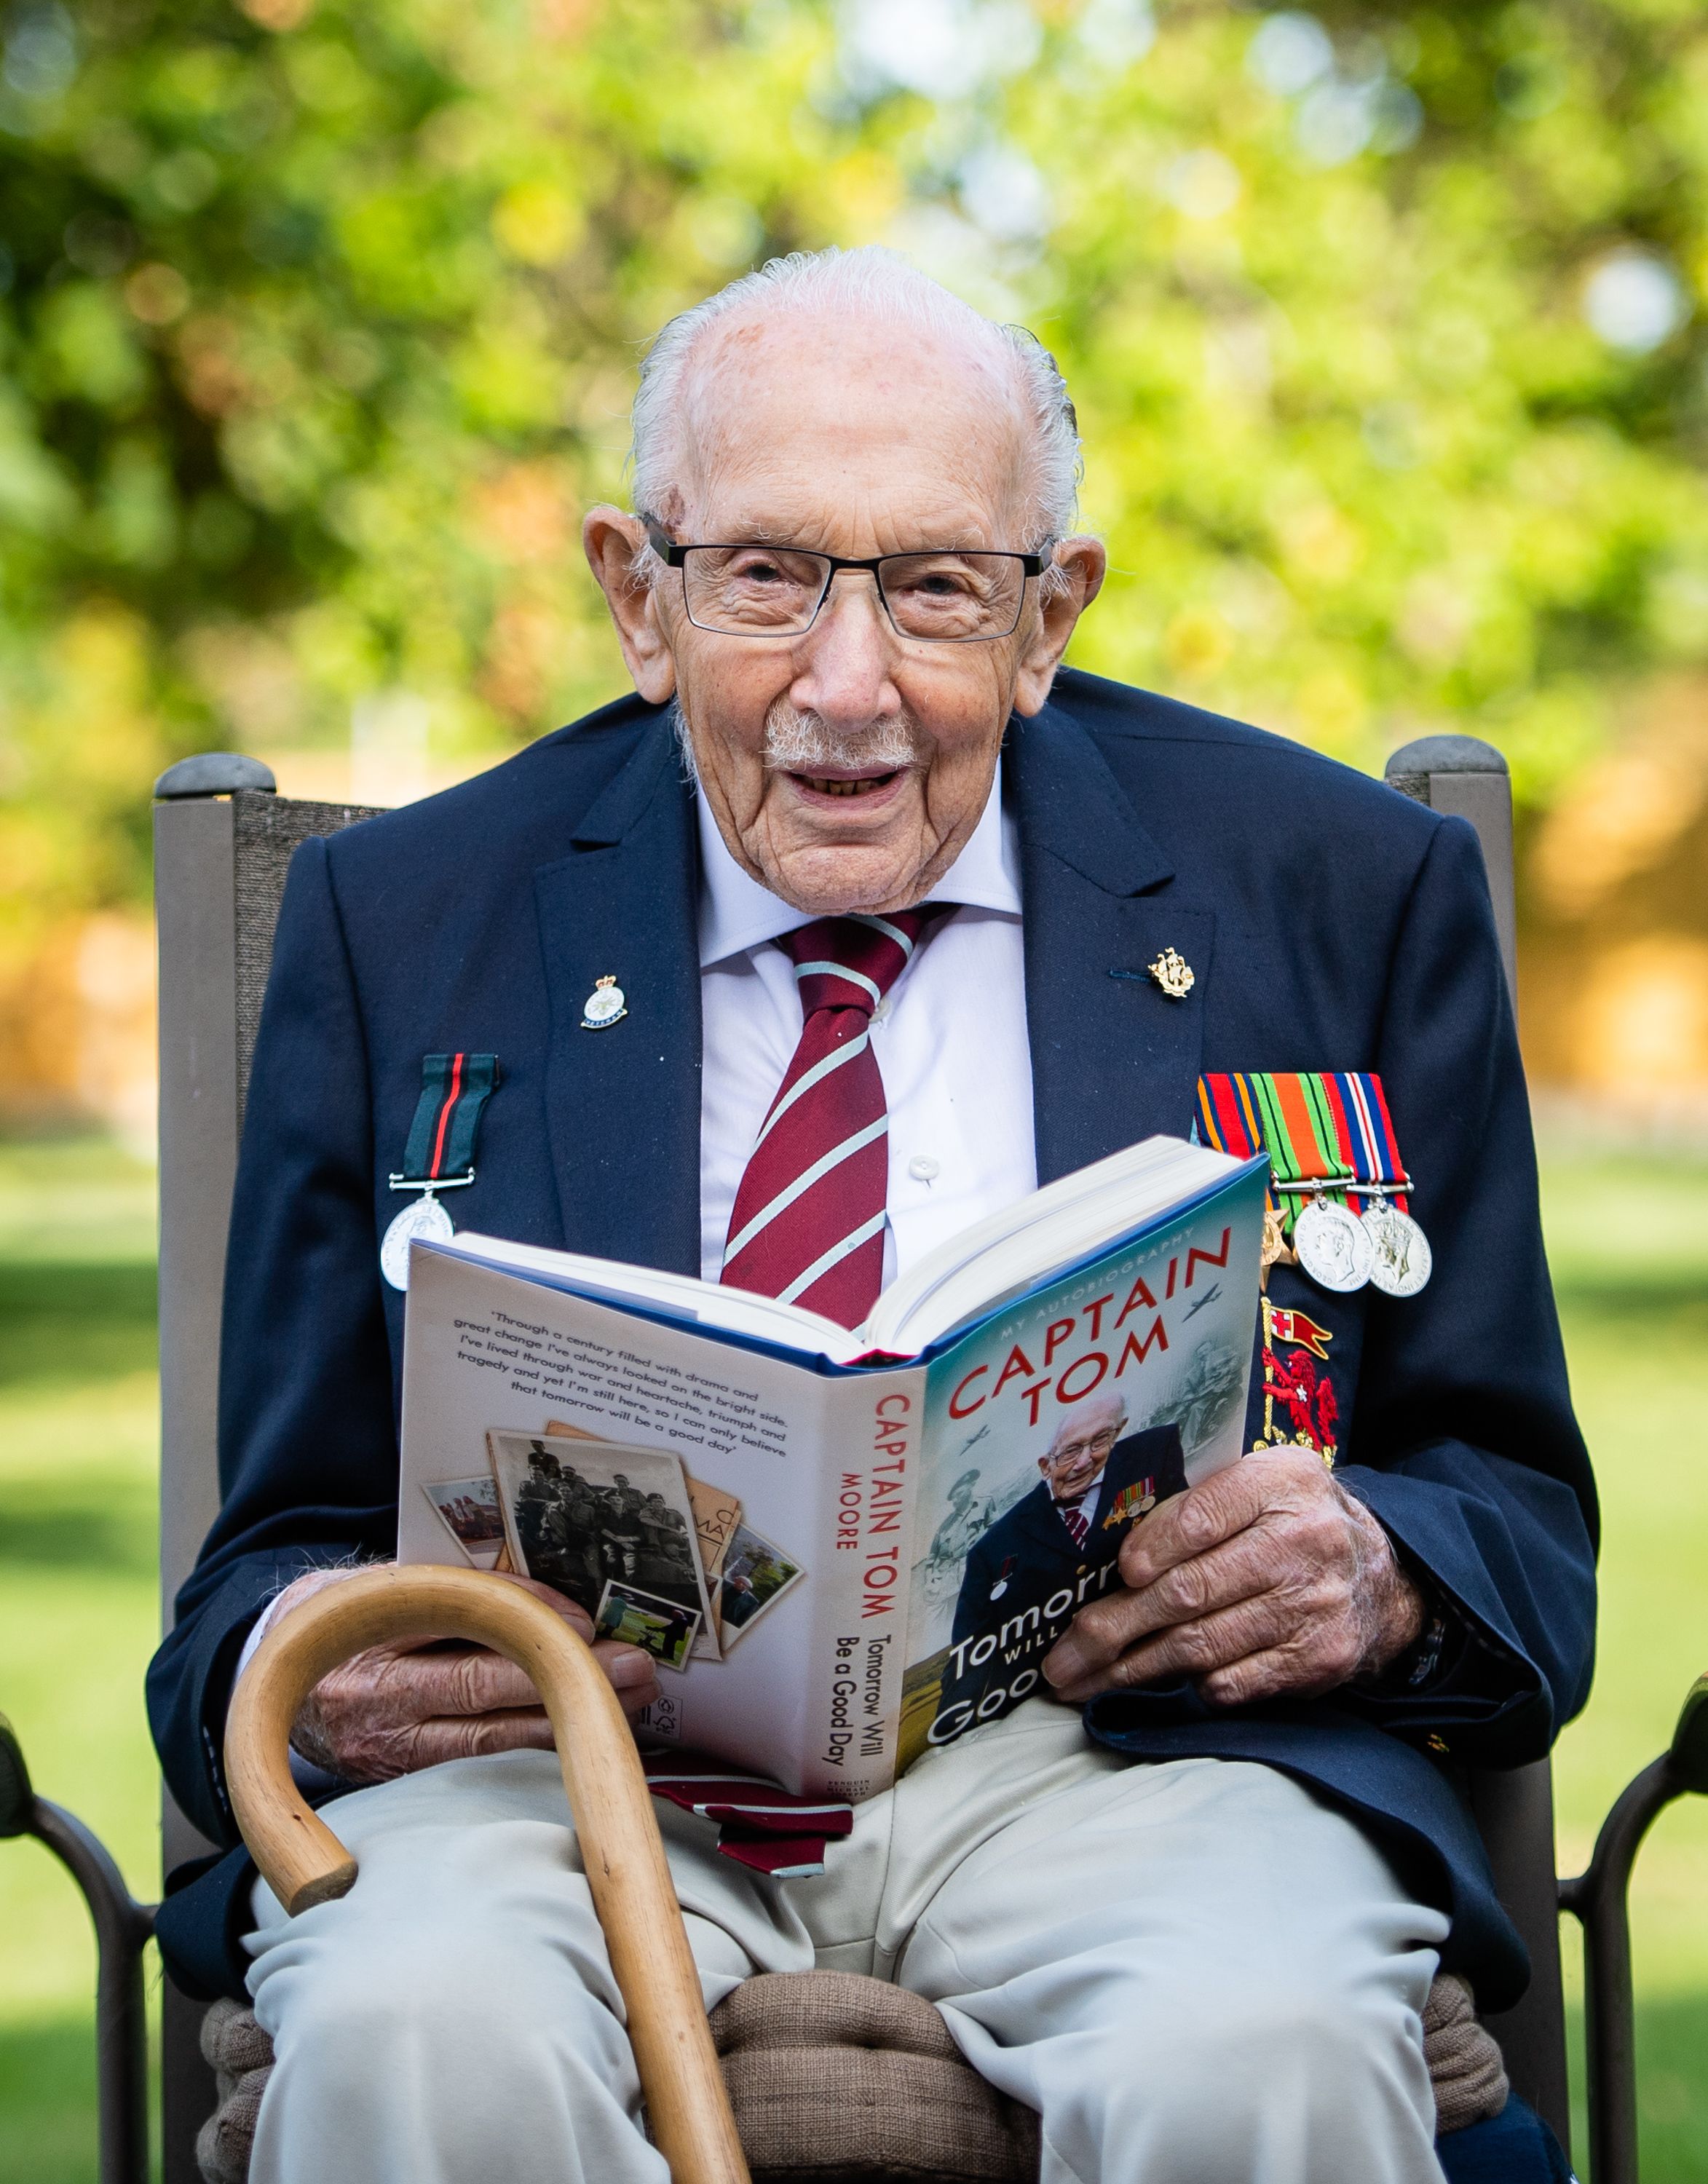 Captain Sir Tom Moore poses during a photocall to mark the launch of his memoir "Tomorrow Will Be A Good Day" on September 17, 2020, in Milton Keynes, England | Photo: Samir Hussein/WireImage/Getty Images